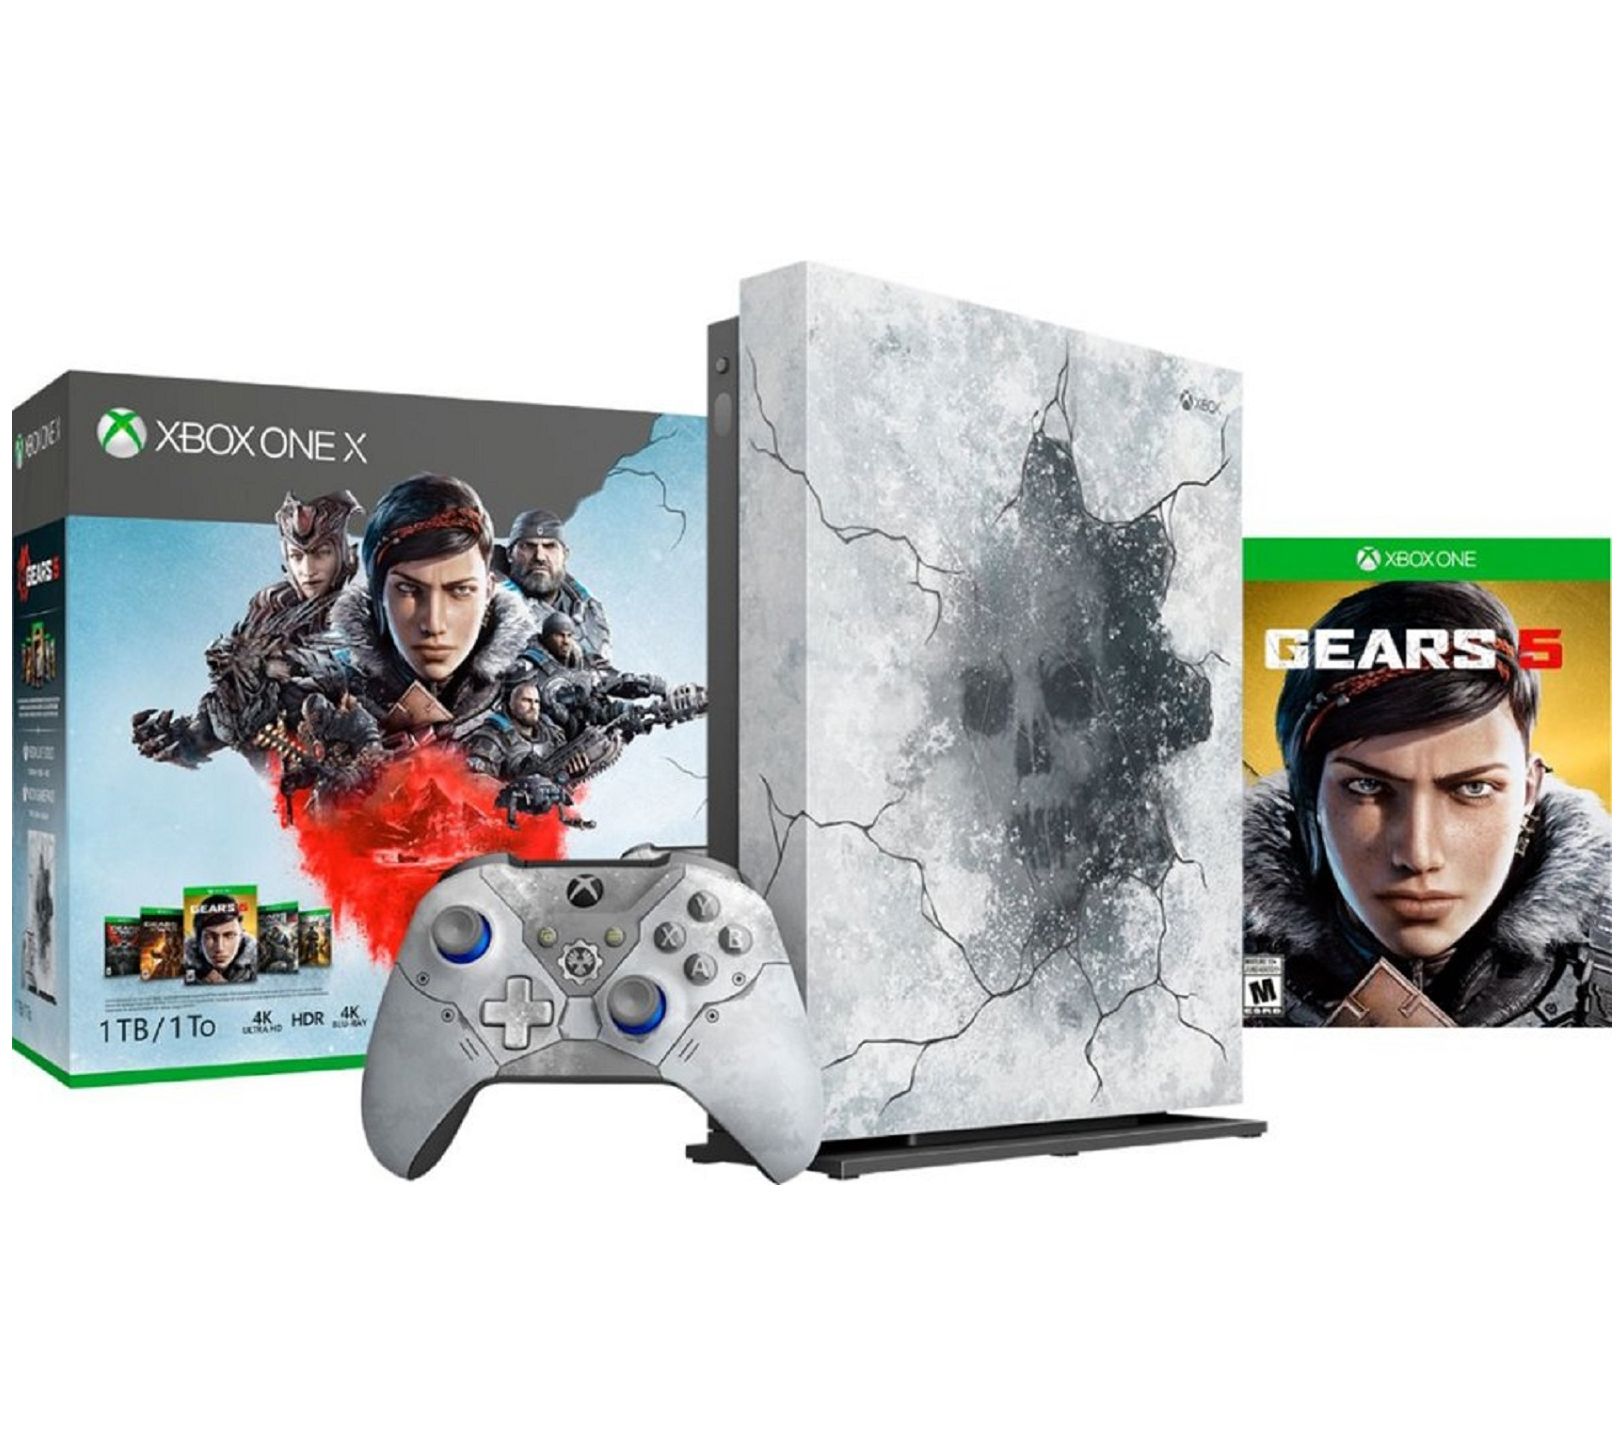 Gears of War 4 gets another two Xbox One S bundles